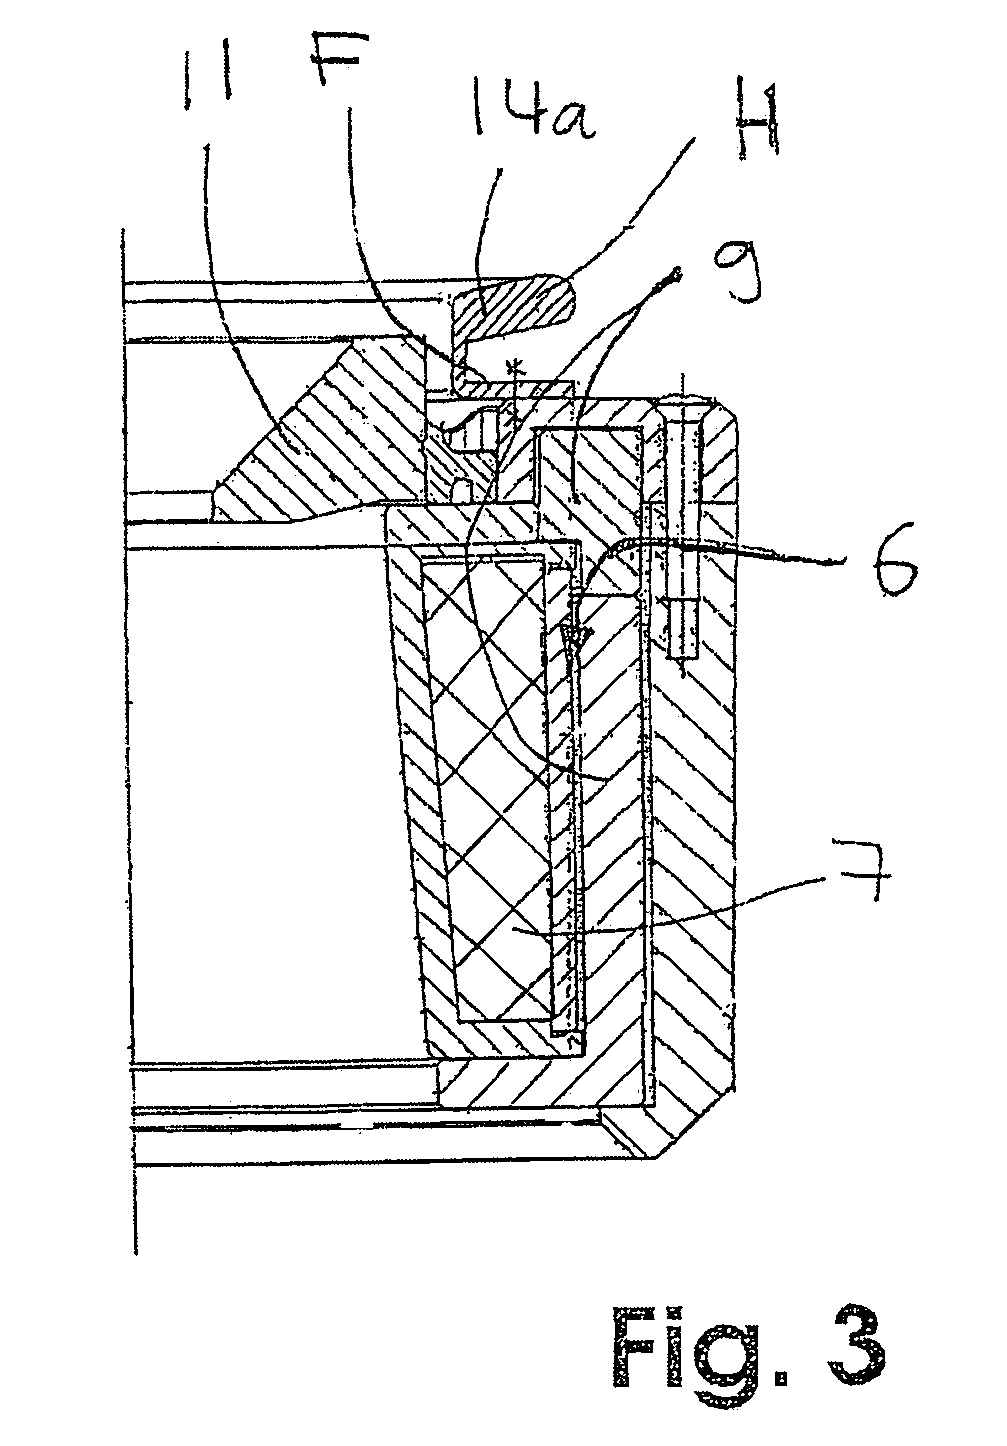 Device for clamping and unclamping a tool through inductive warming of a tool holder